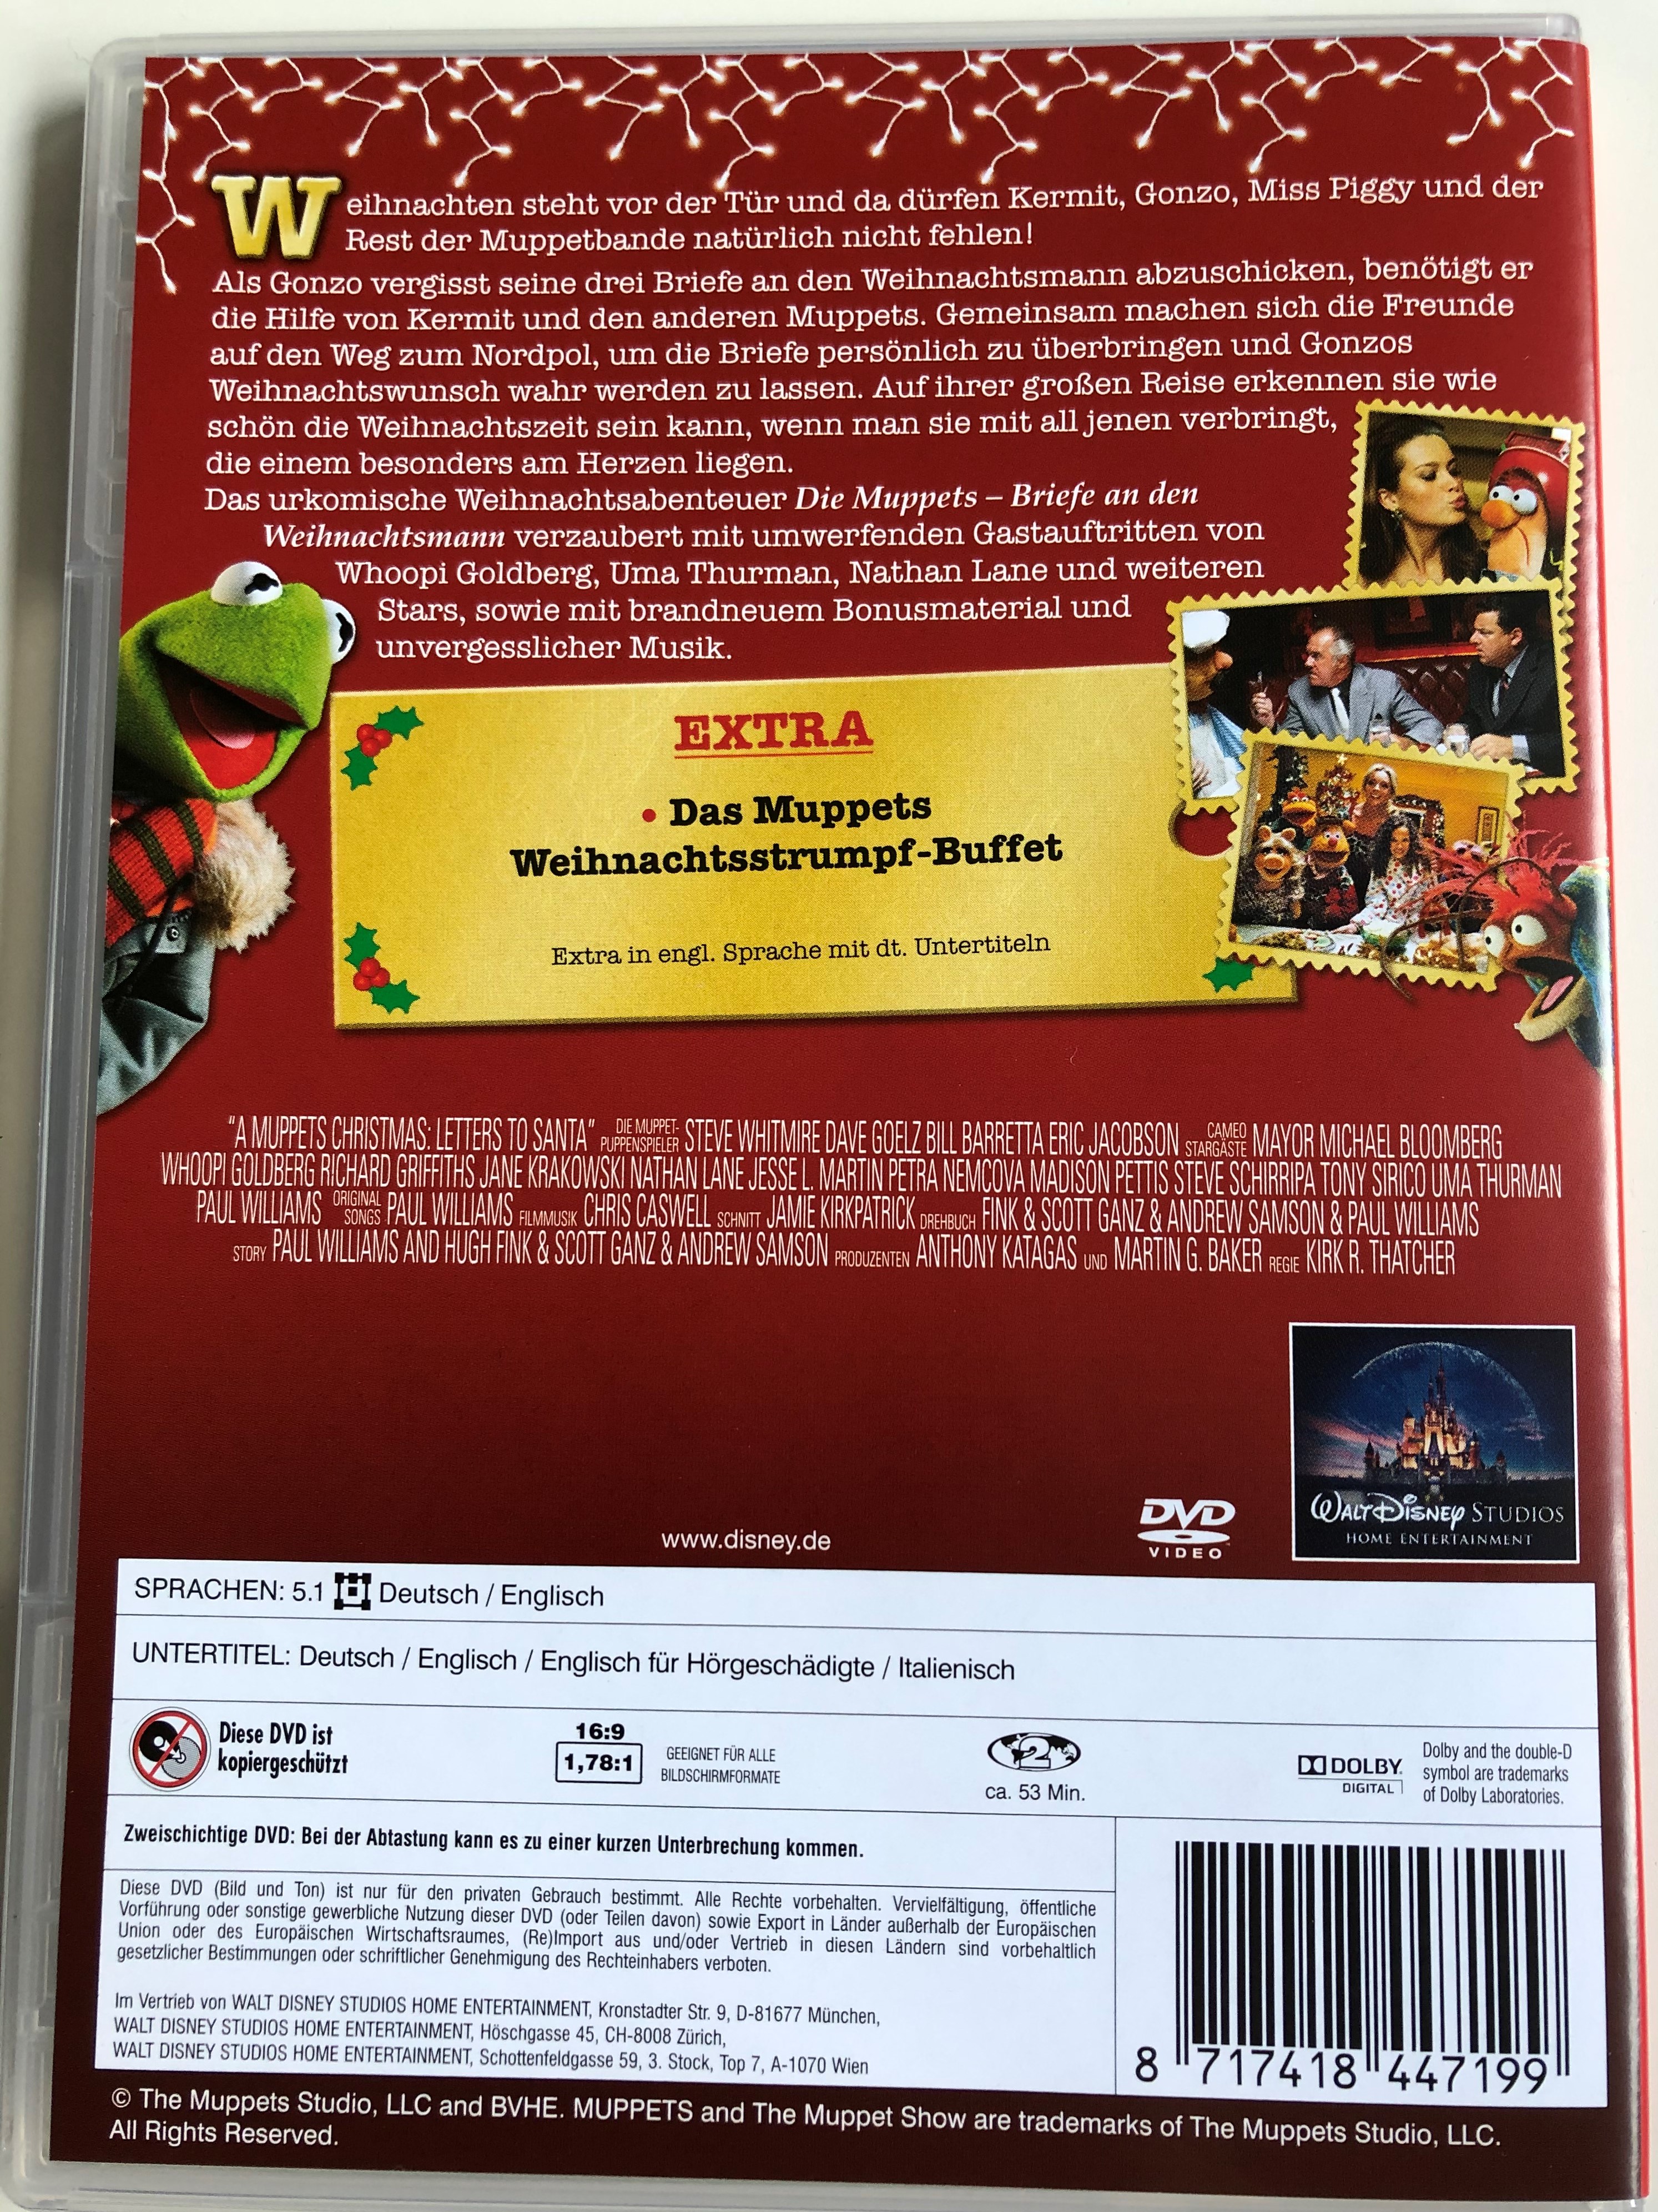 a-muppets-christmas-letters-to-santa-dvd-2008-die-muppets-briefe-an-den-weihnachtsmann-2.jpg